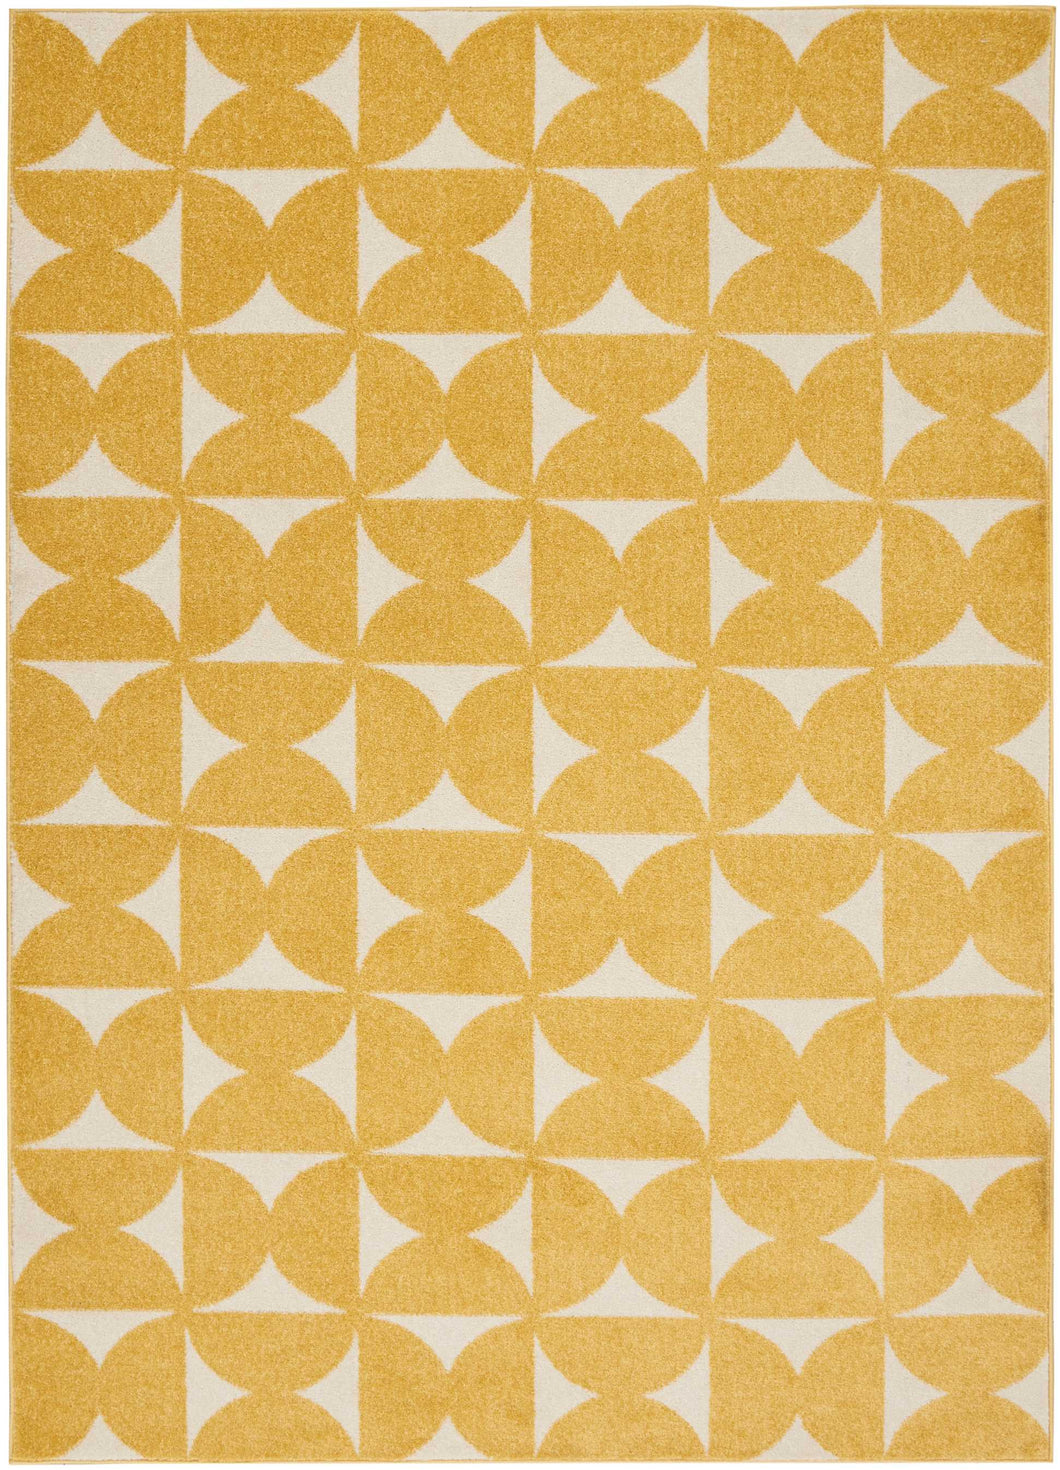 Nourison Harper DS301 Yellow 4'x6' Area Rug DS301 Yellow